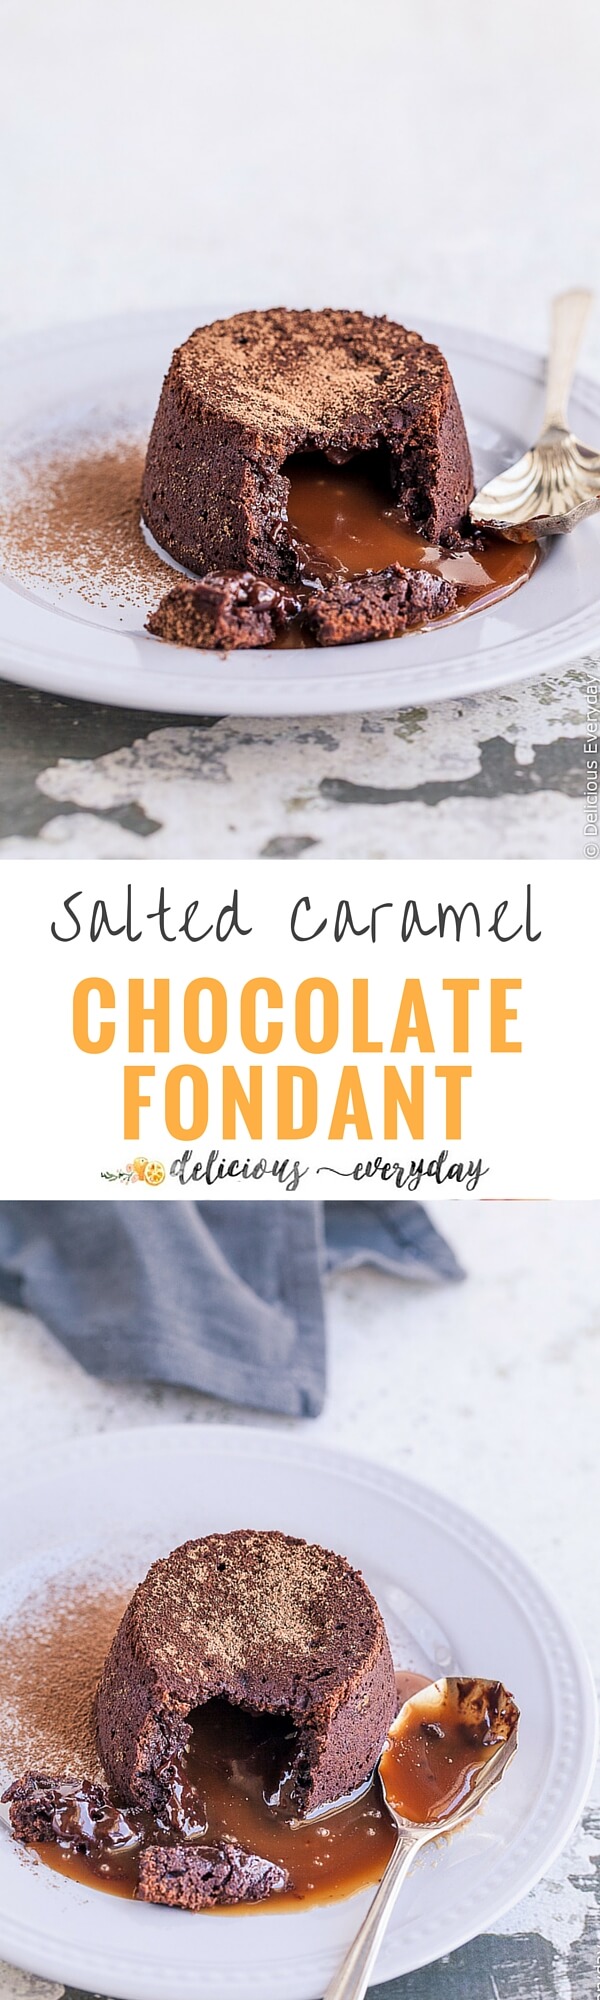 This deliciously easy chocolate fondant recipe makes 2 individual gluten free chocolate fondants with a dreamy salted caramel filling. | Click for the recipe